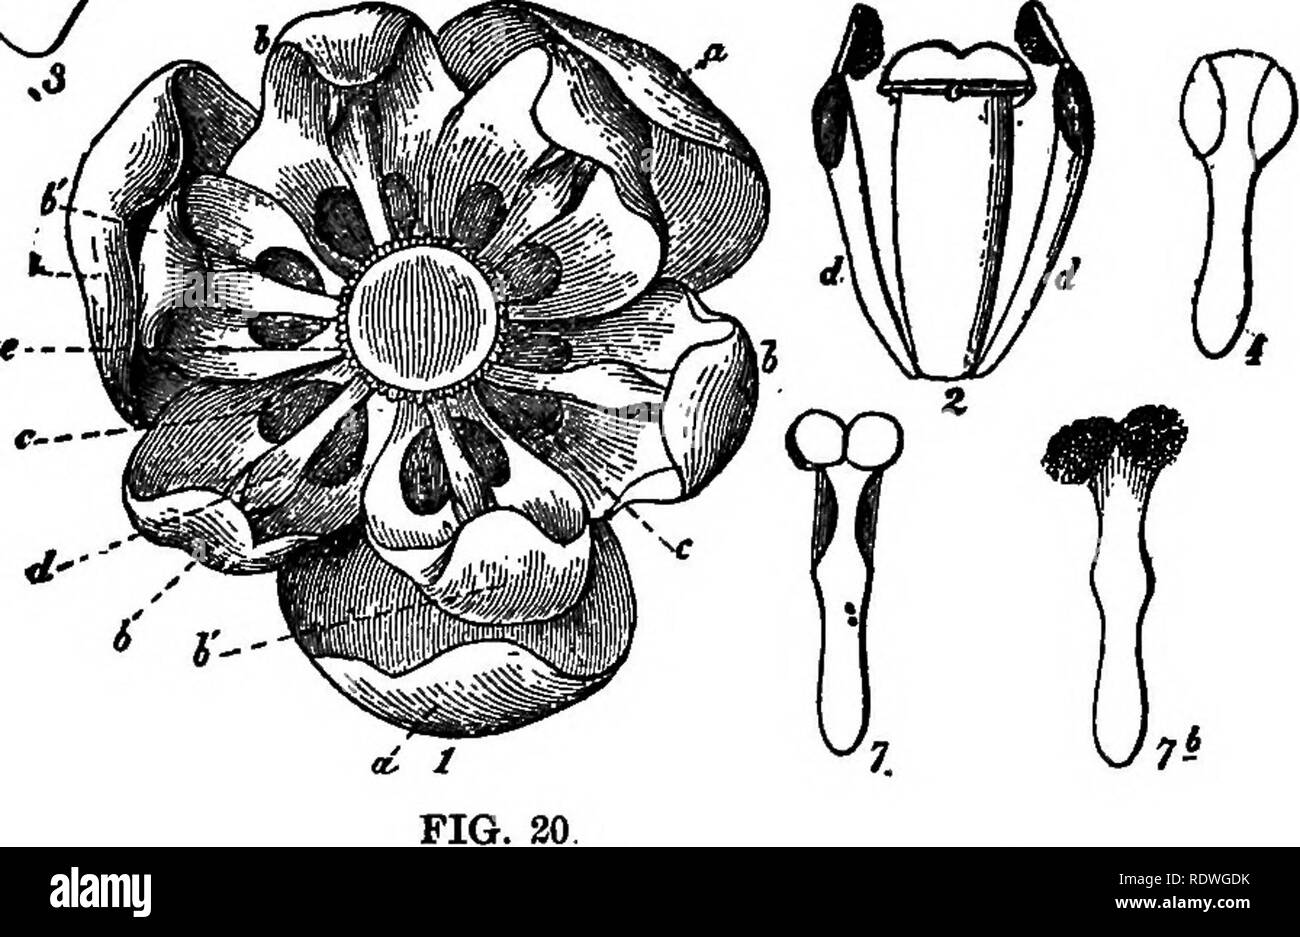 . Flower ecology. Plant ecology; Fertilization of plants. Figr. 20. Flower of common bnrberry (Berberts vulgaris). 1, flower seen above; a, andsepale; h inner petals: c, nectaries; d, filaments; e, stigrma; 3. position of the stamen after springing upward; 3, petal with the two thick, fleshy orange nectaries; 4-7, stamen in different stagree of dehiscence. (After Hermann Mueller.) must soon he dusted all round with pollen and it must fer- tilize every succeeding flower that it visits.&quot; Members of this order are among the prettiest of our early flowers. Dic&amp;itra spectabilis D O, Bleed Stock Photo